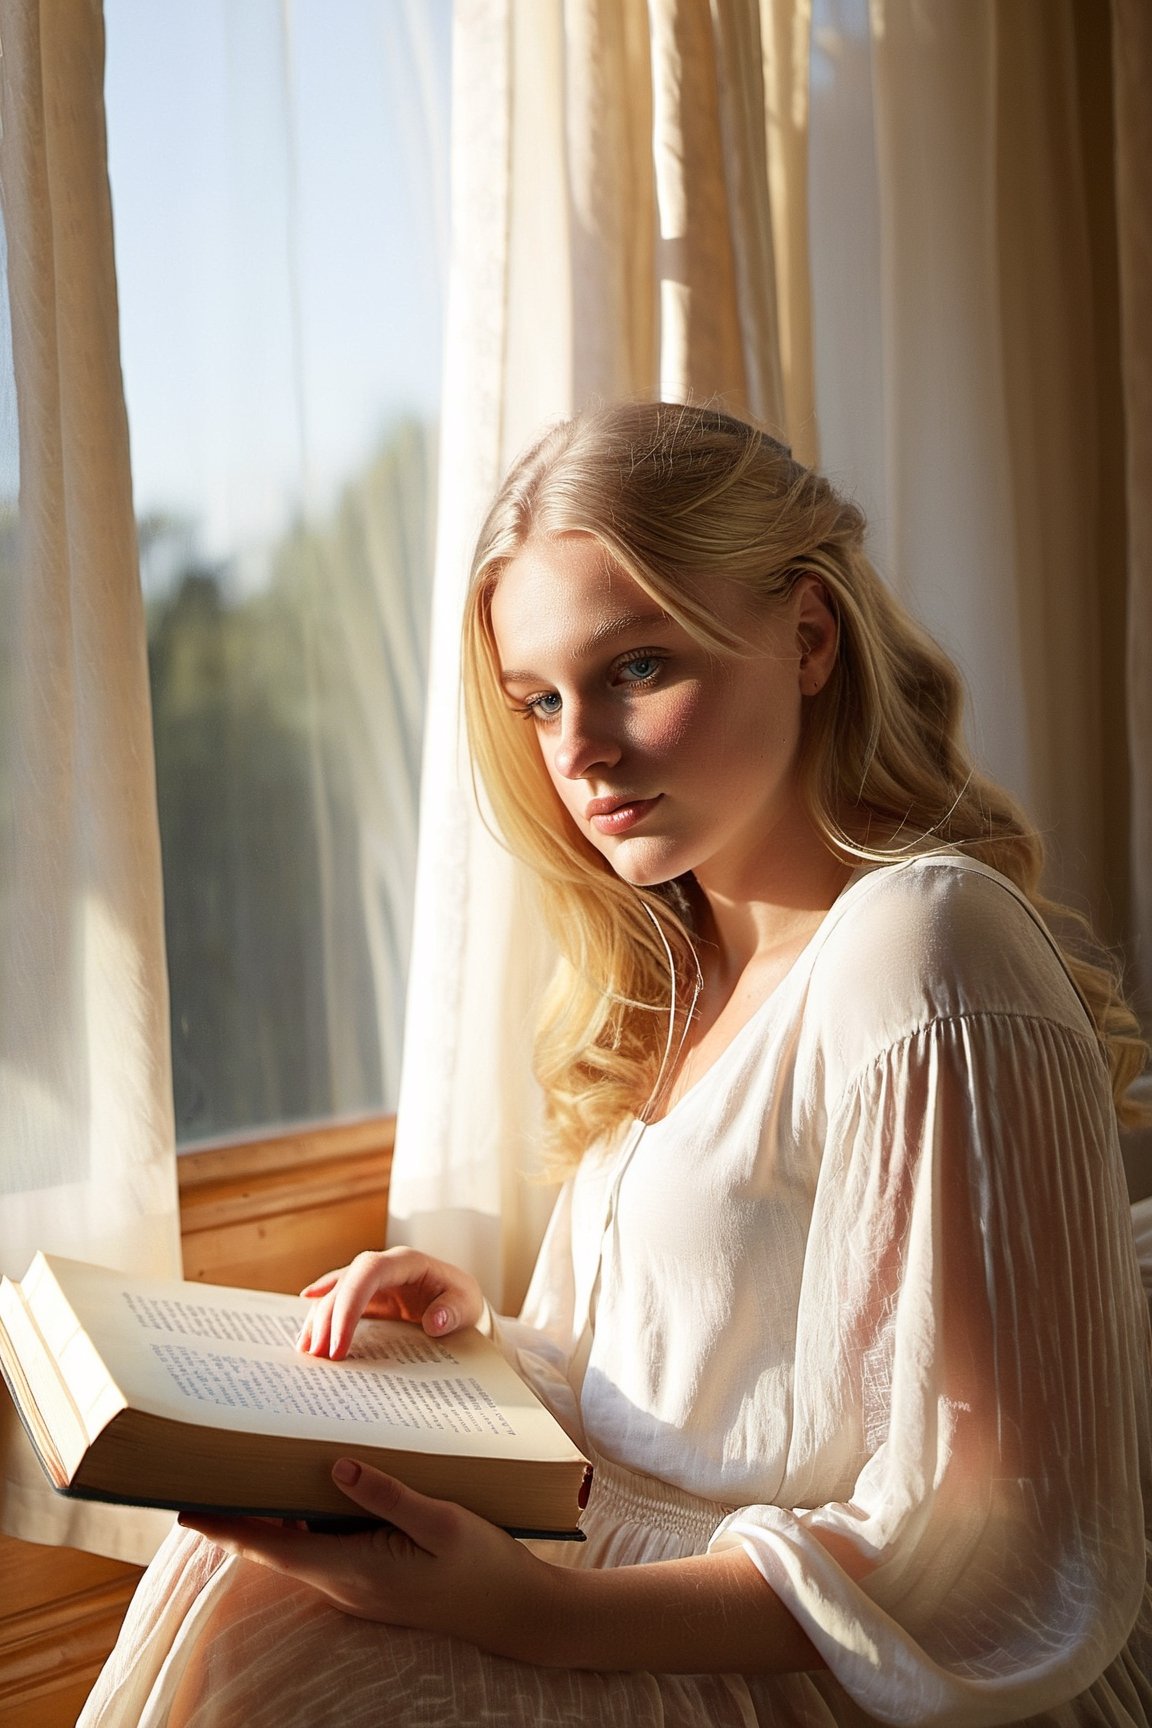 20-year-old blonde girl, lounging on the bed, morning sunlight filtering through sheer curtains, scattered books, (realism:1.5, soft lighting:1.5)